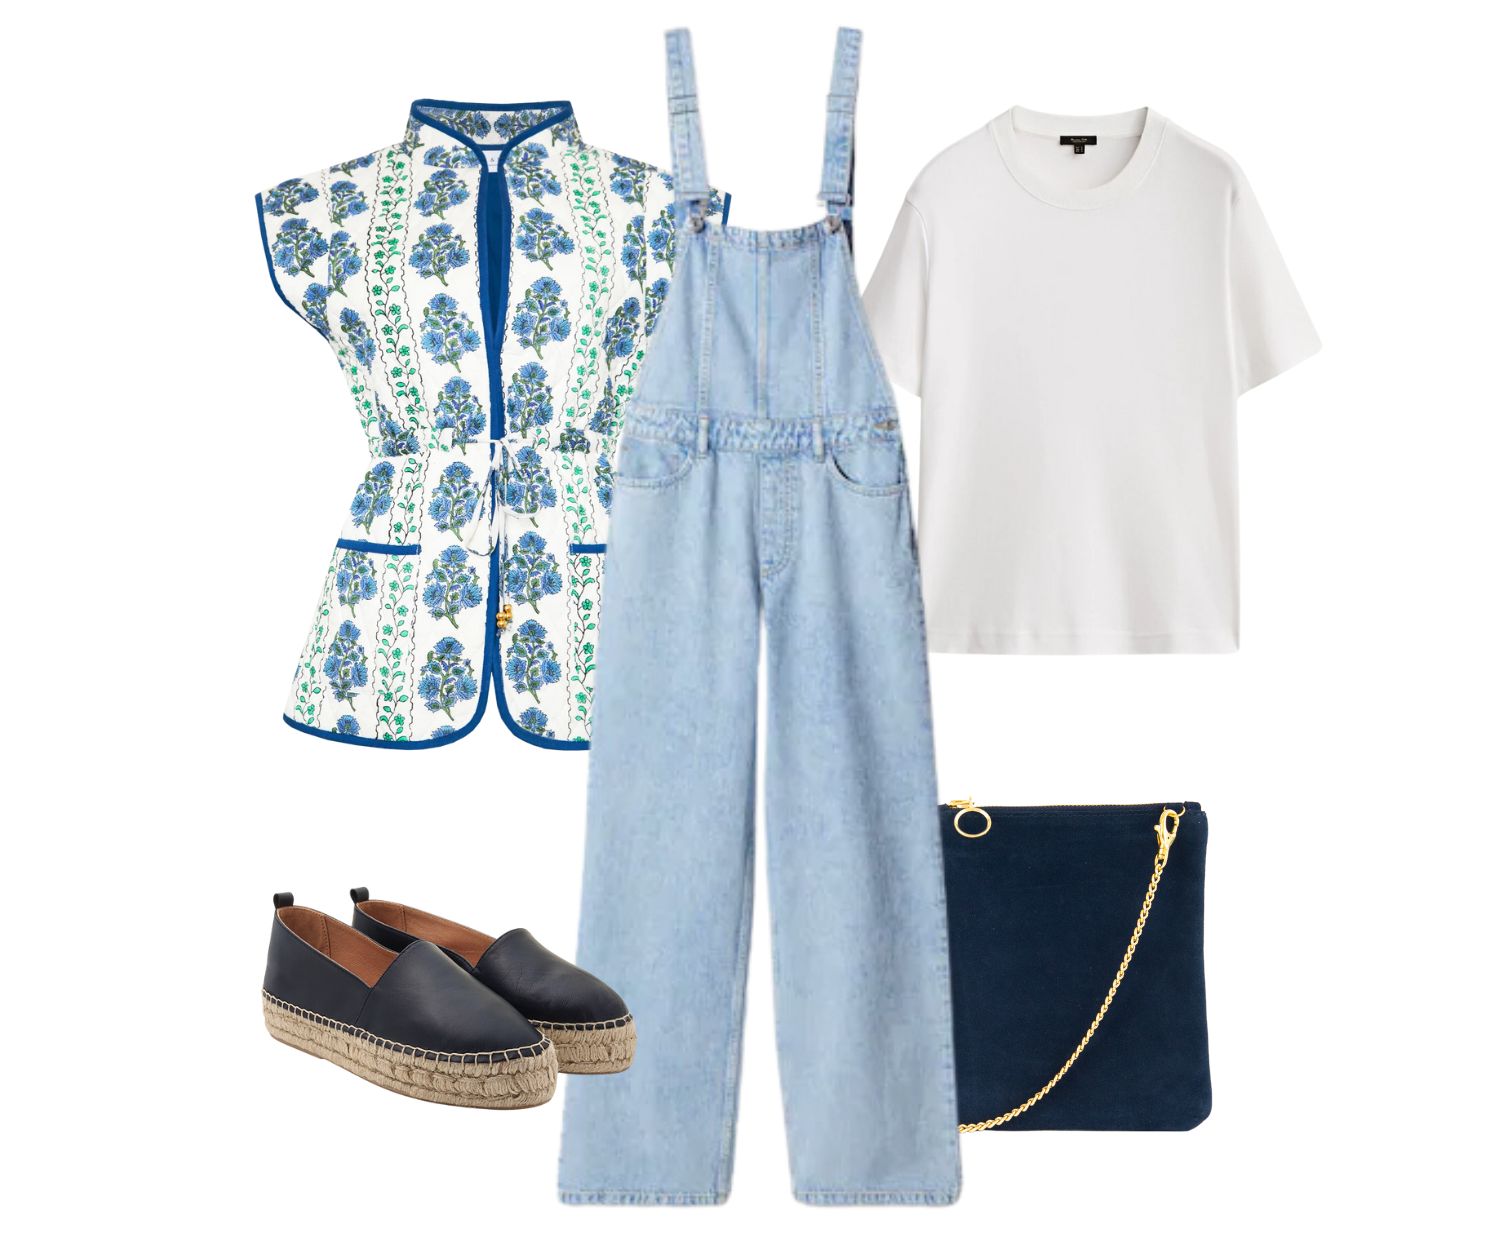 dida ritchie navy leather luna espadrilles - outfit inspirations